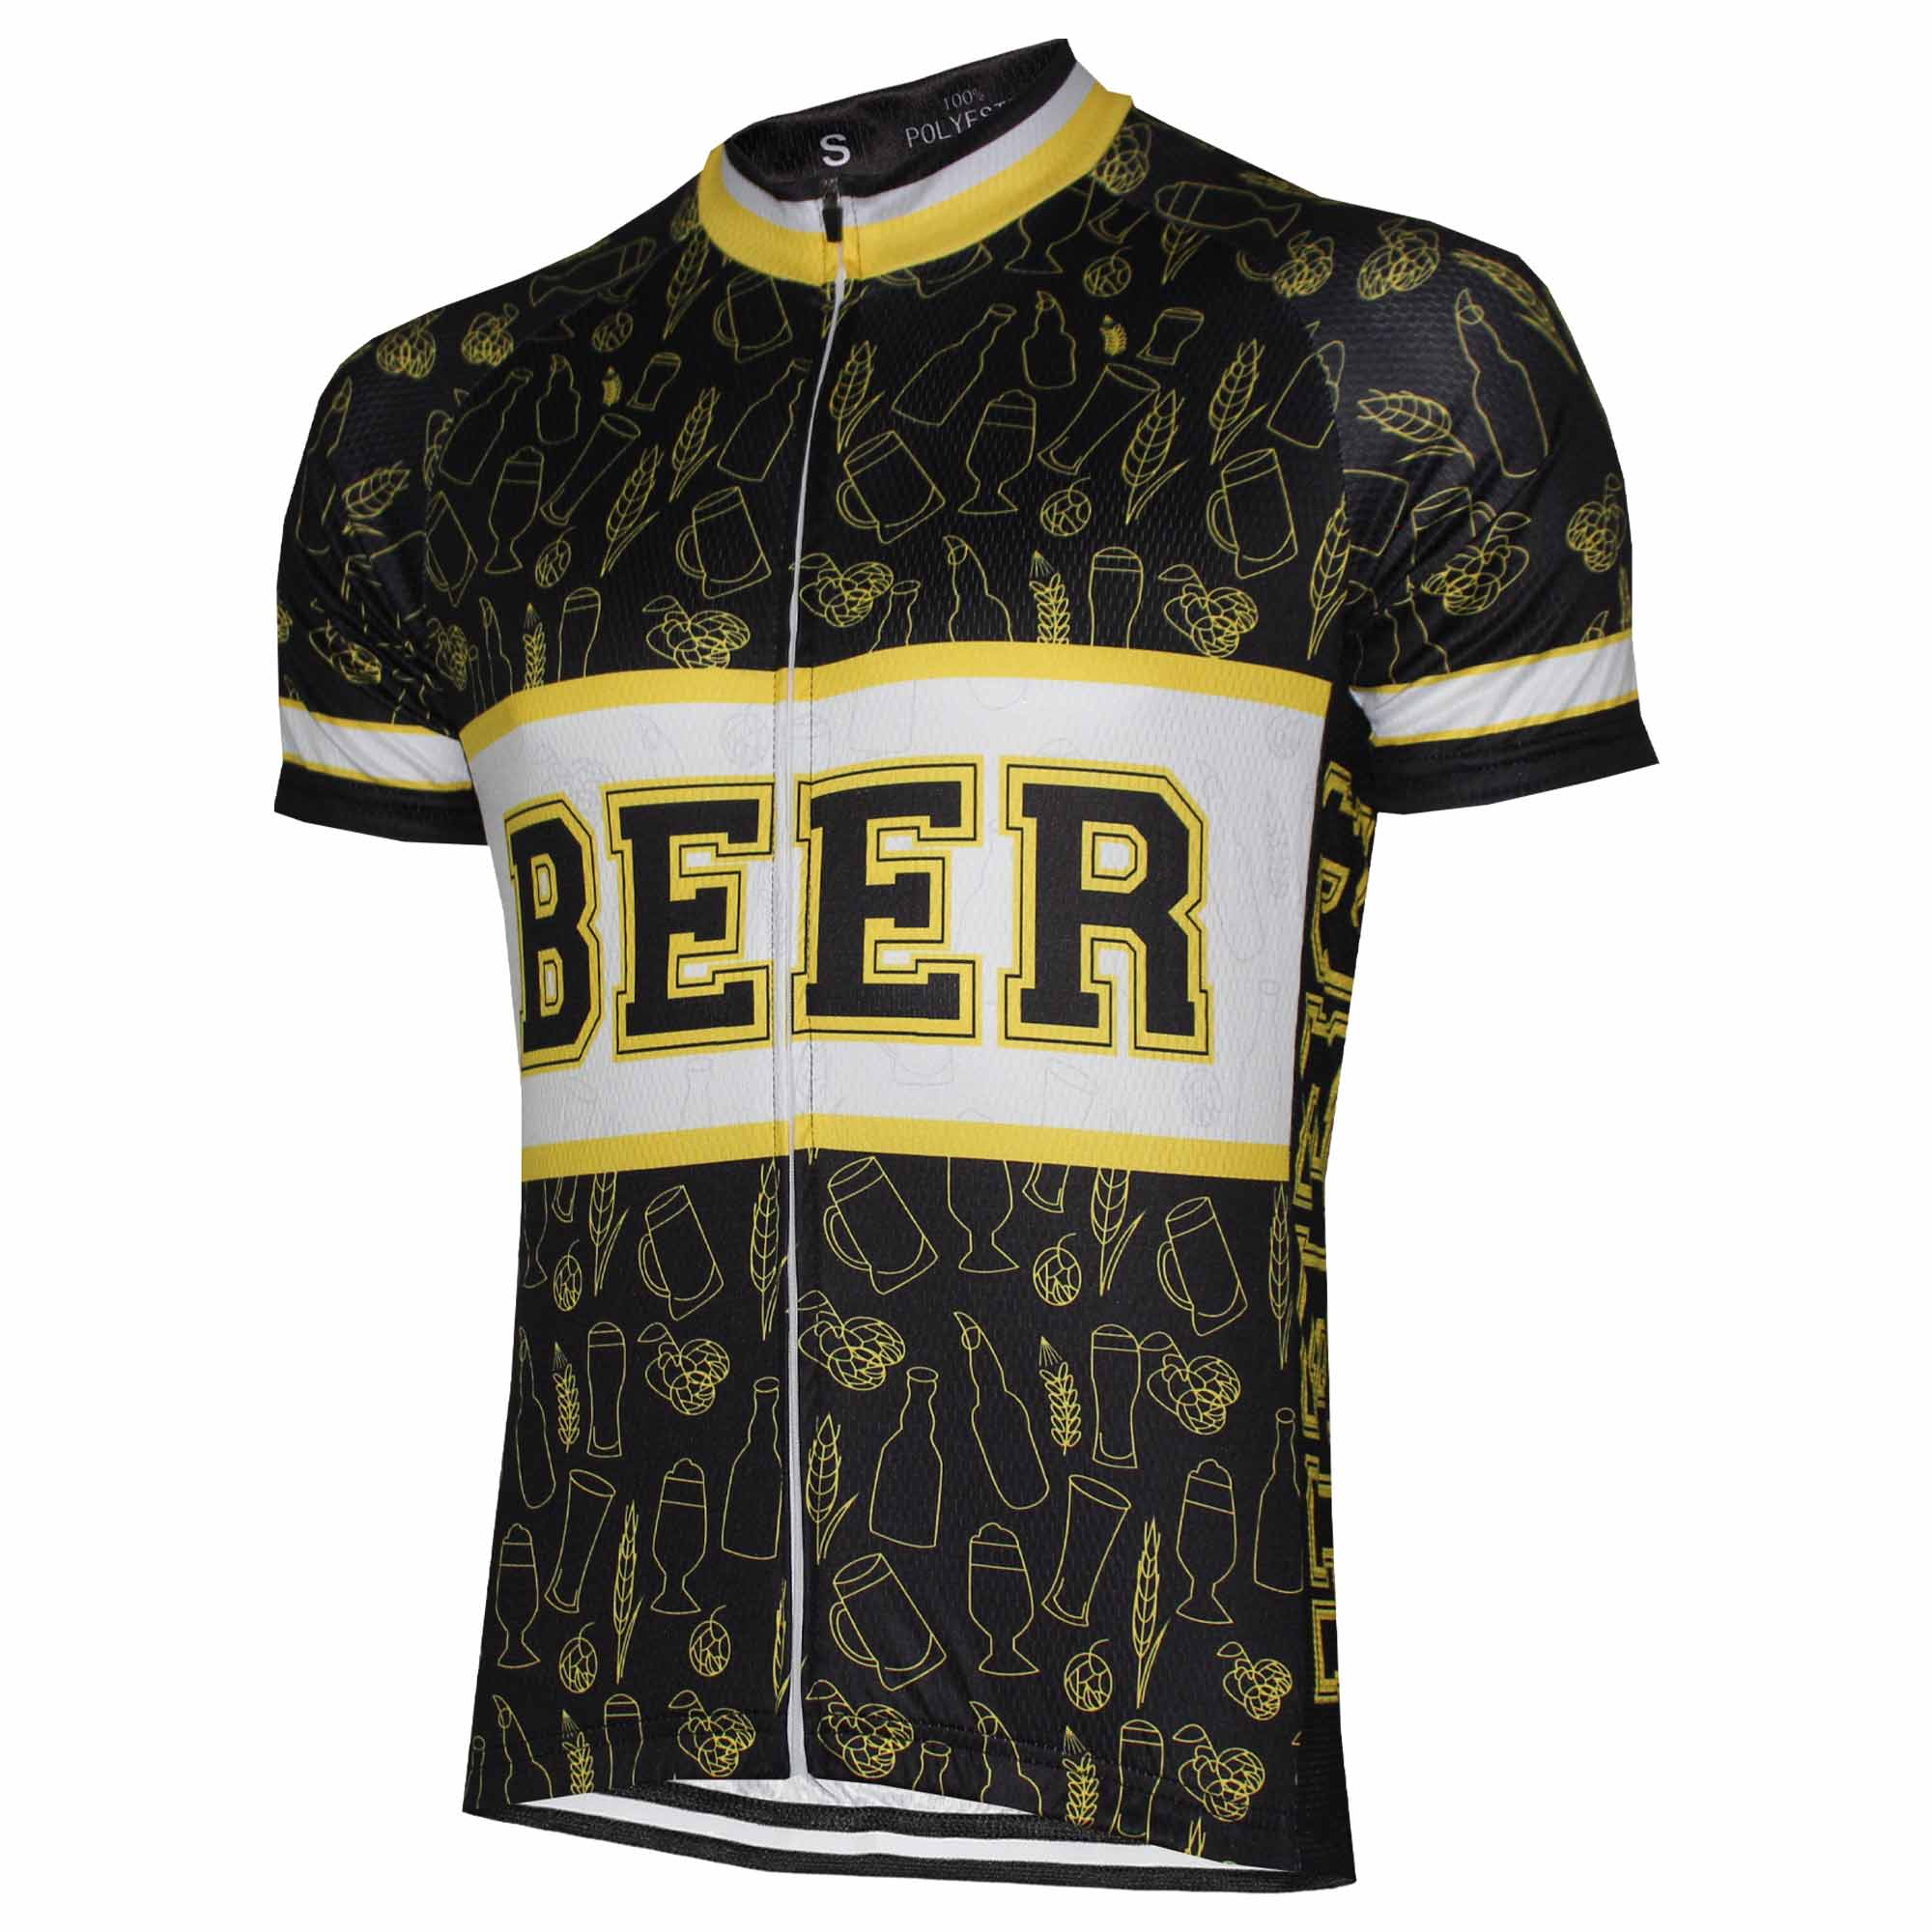 Beer Cycling Jersey.